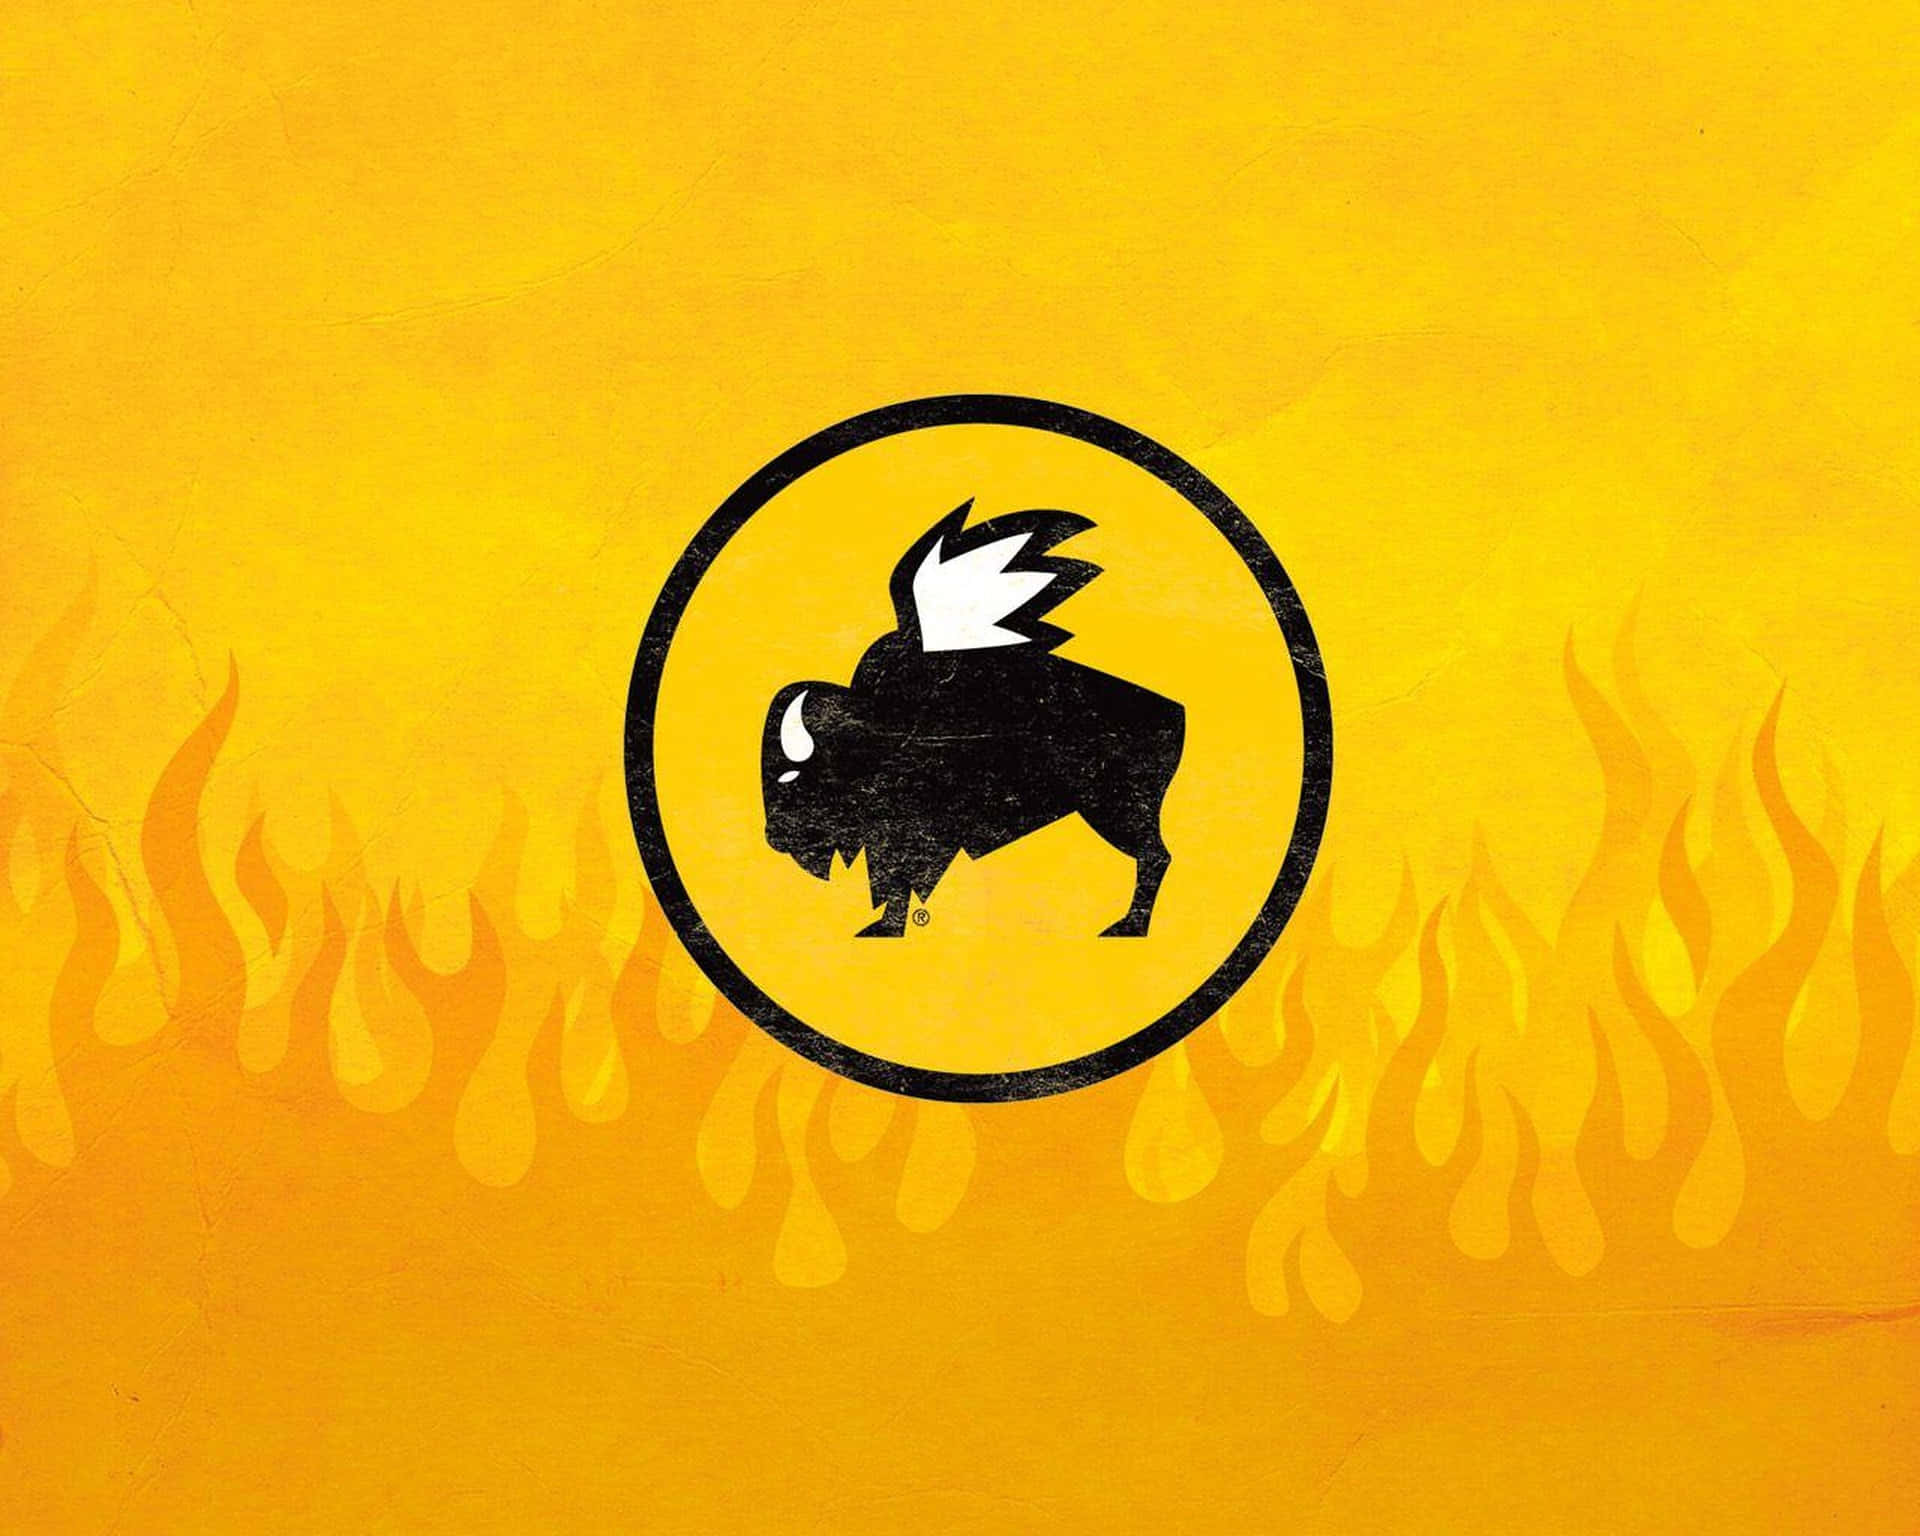 Satisfy your appetites with Buffalo Wild Wings